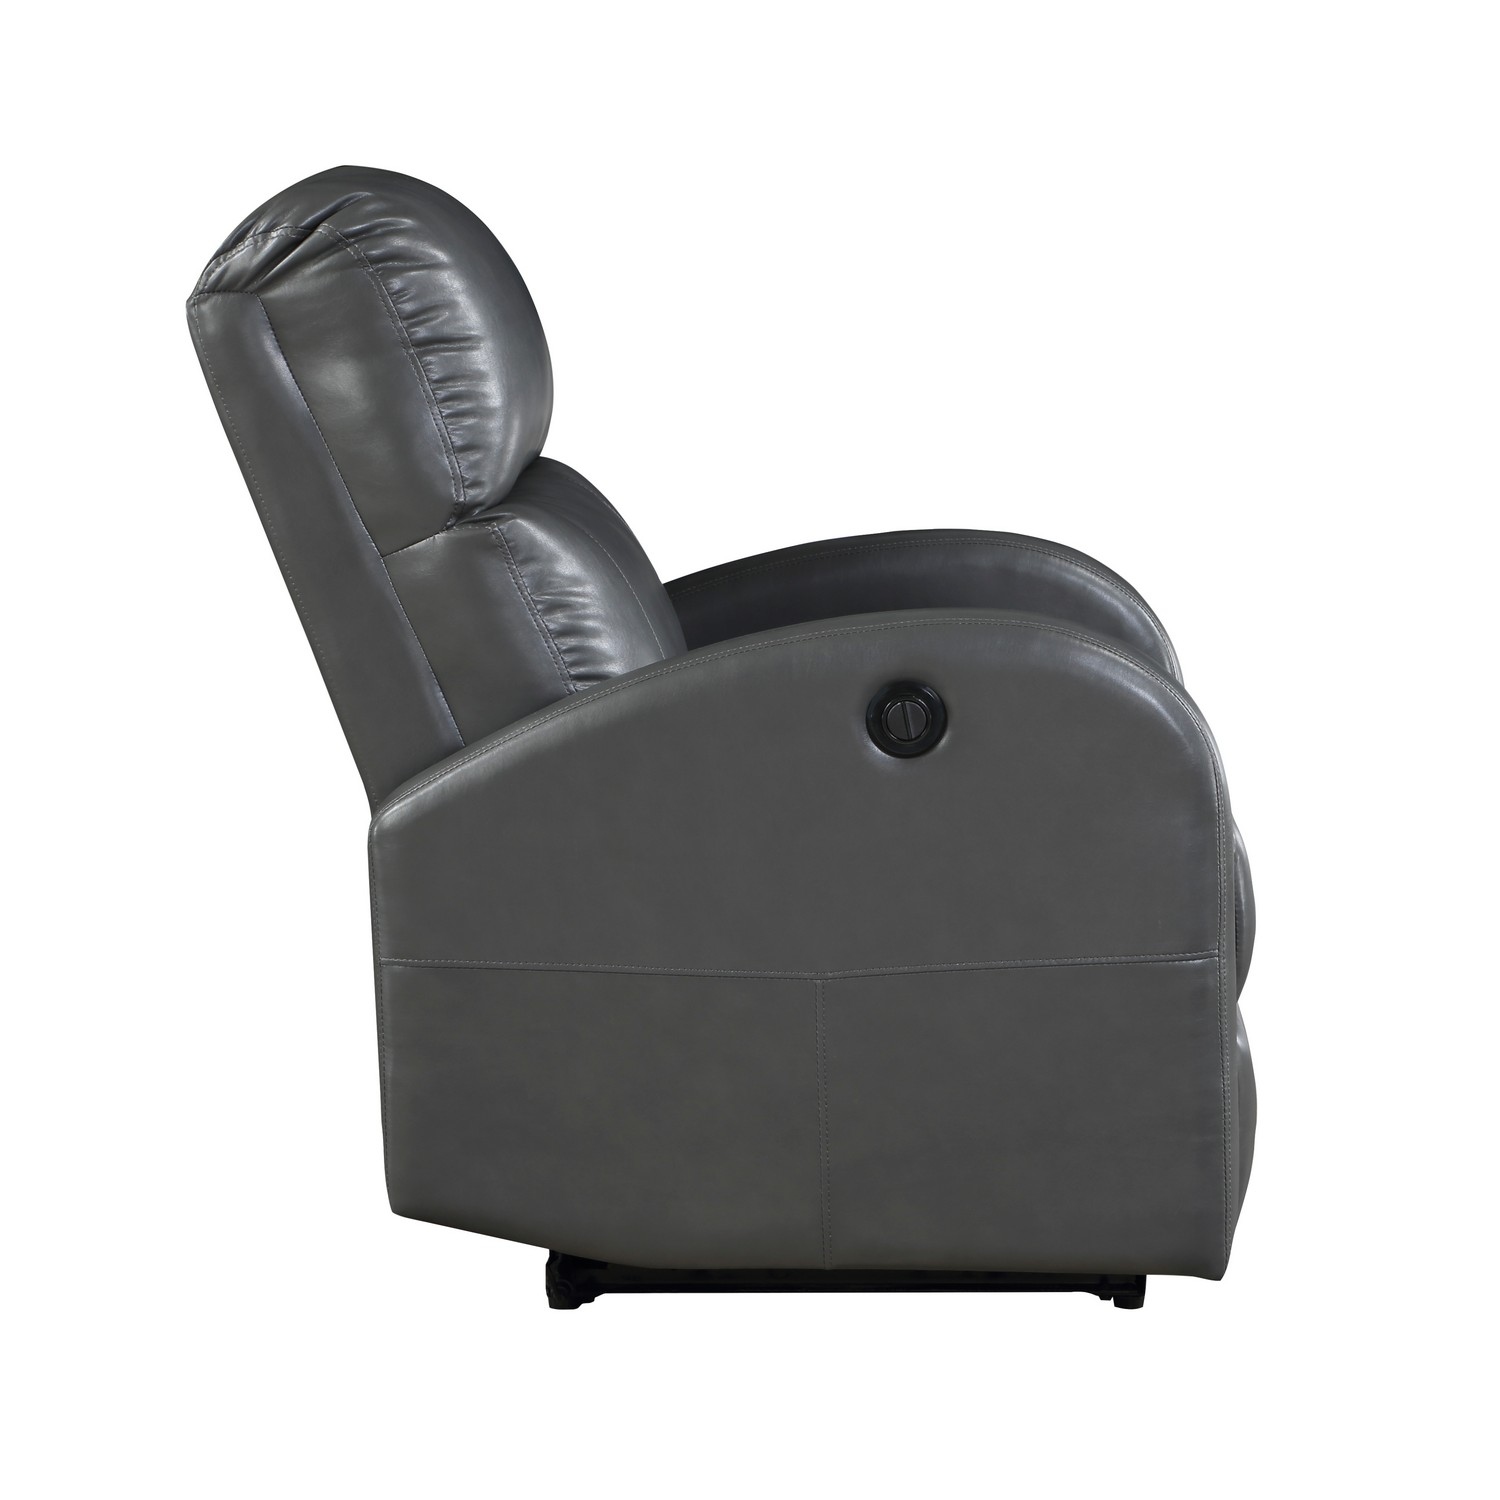 Homelegance Wiley Power Reclining Chair - Gray